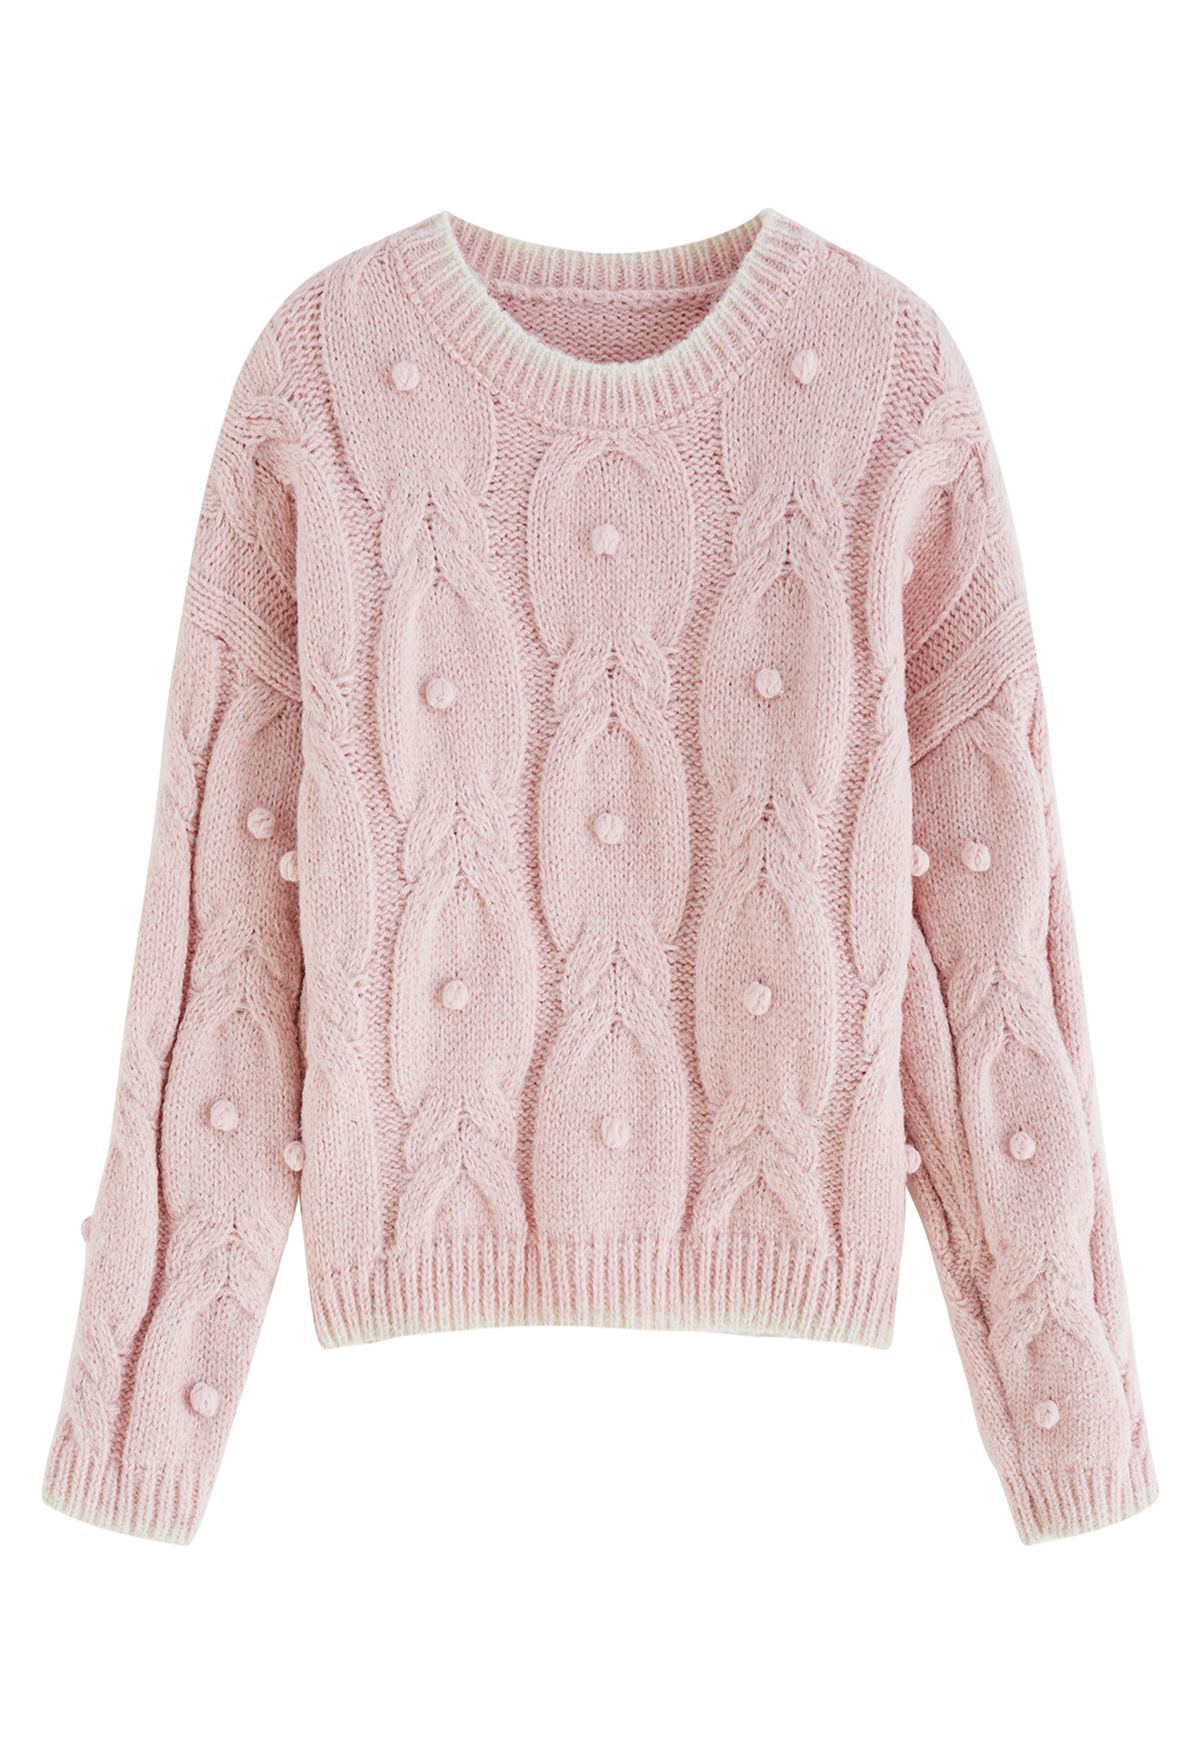 Contrast Edge Pom-Pom Cable Knit Sweater in Pink - Retro, Indie and ...